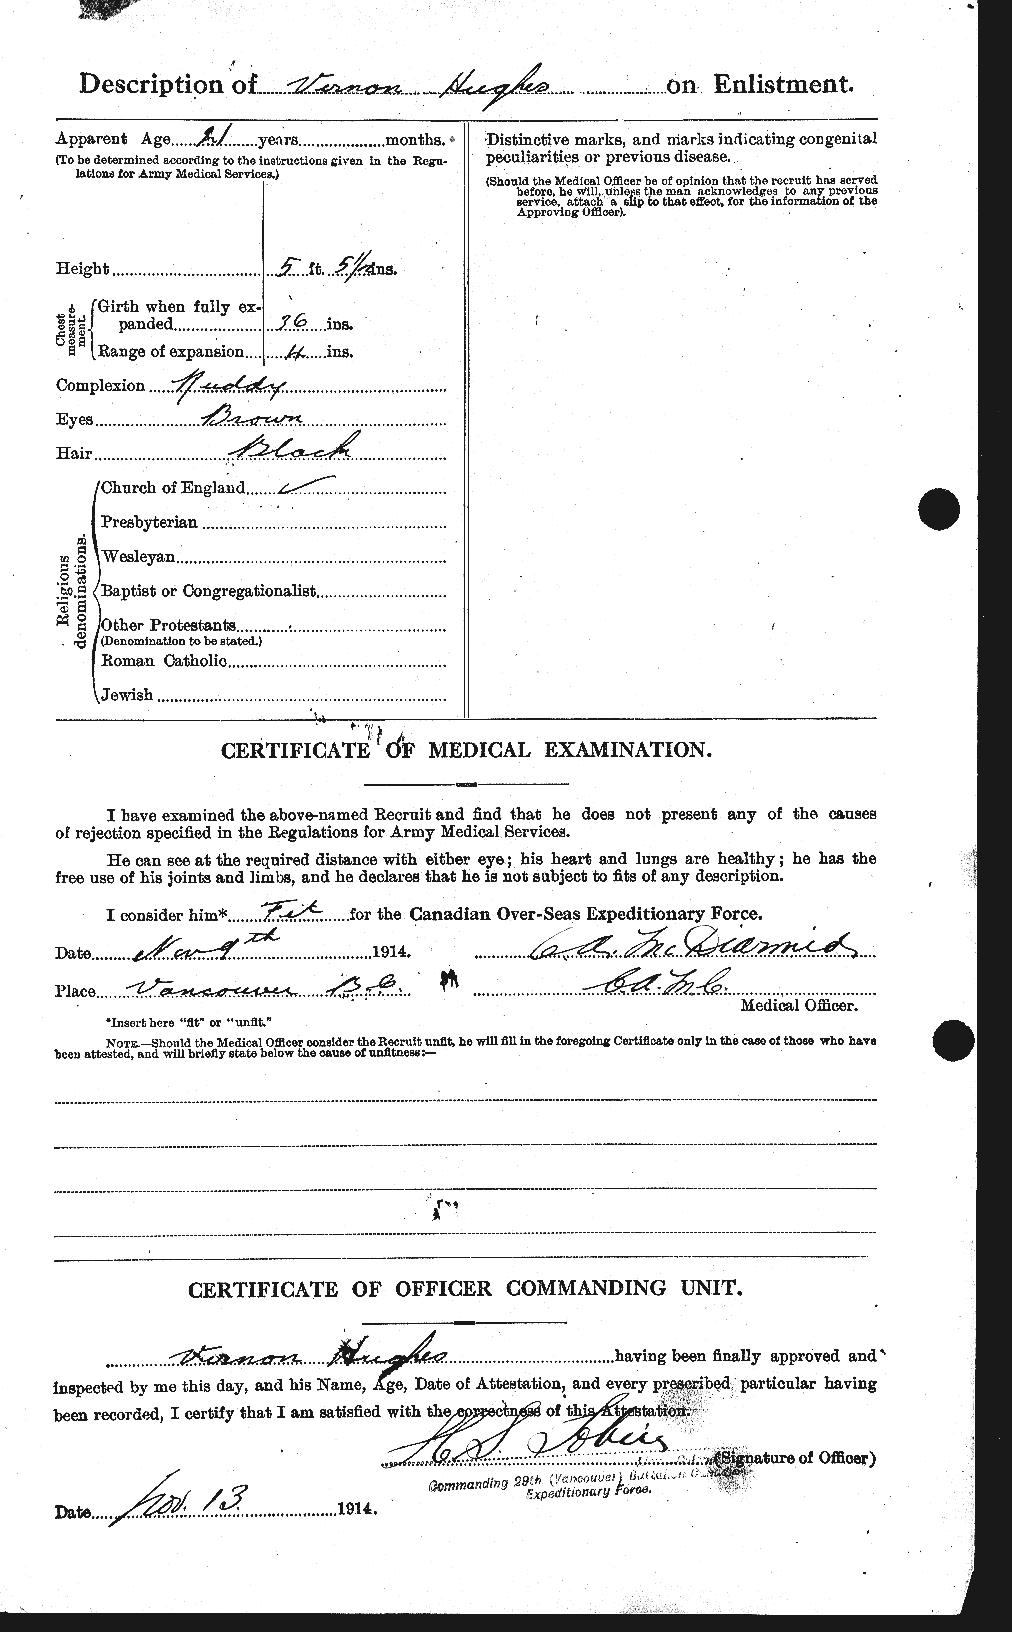 Personnel Records of the First World War - CEF 405848b